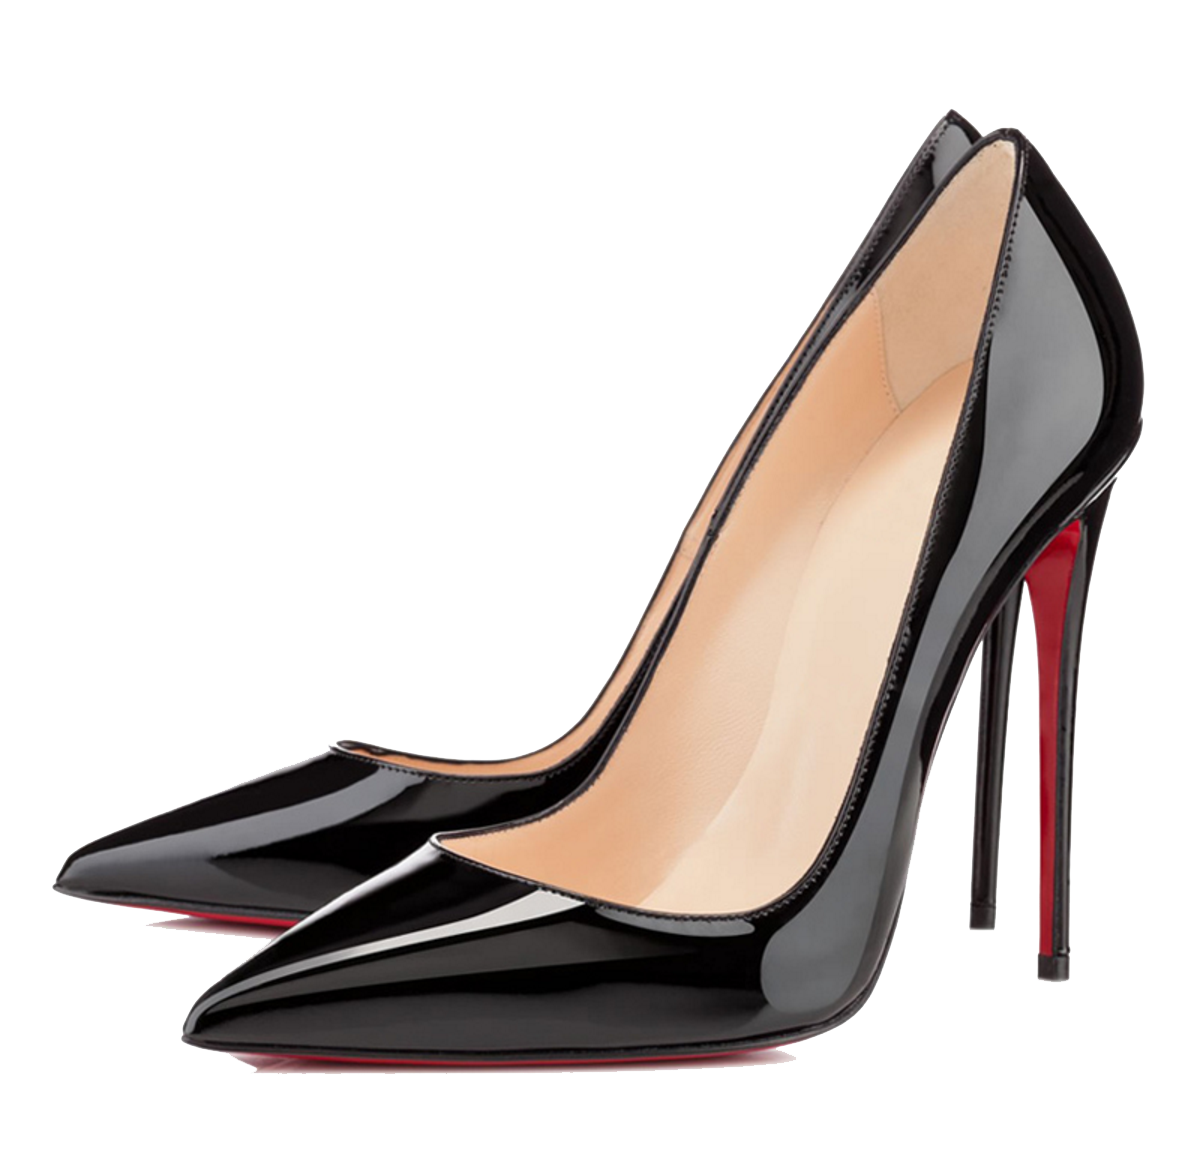 Women Shoes Free PNG Image